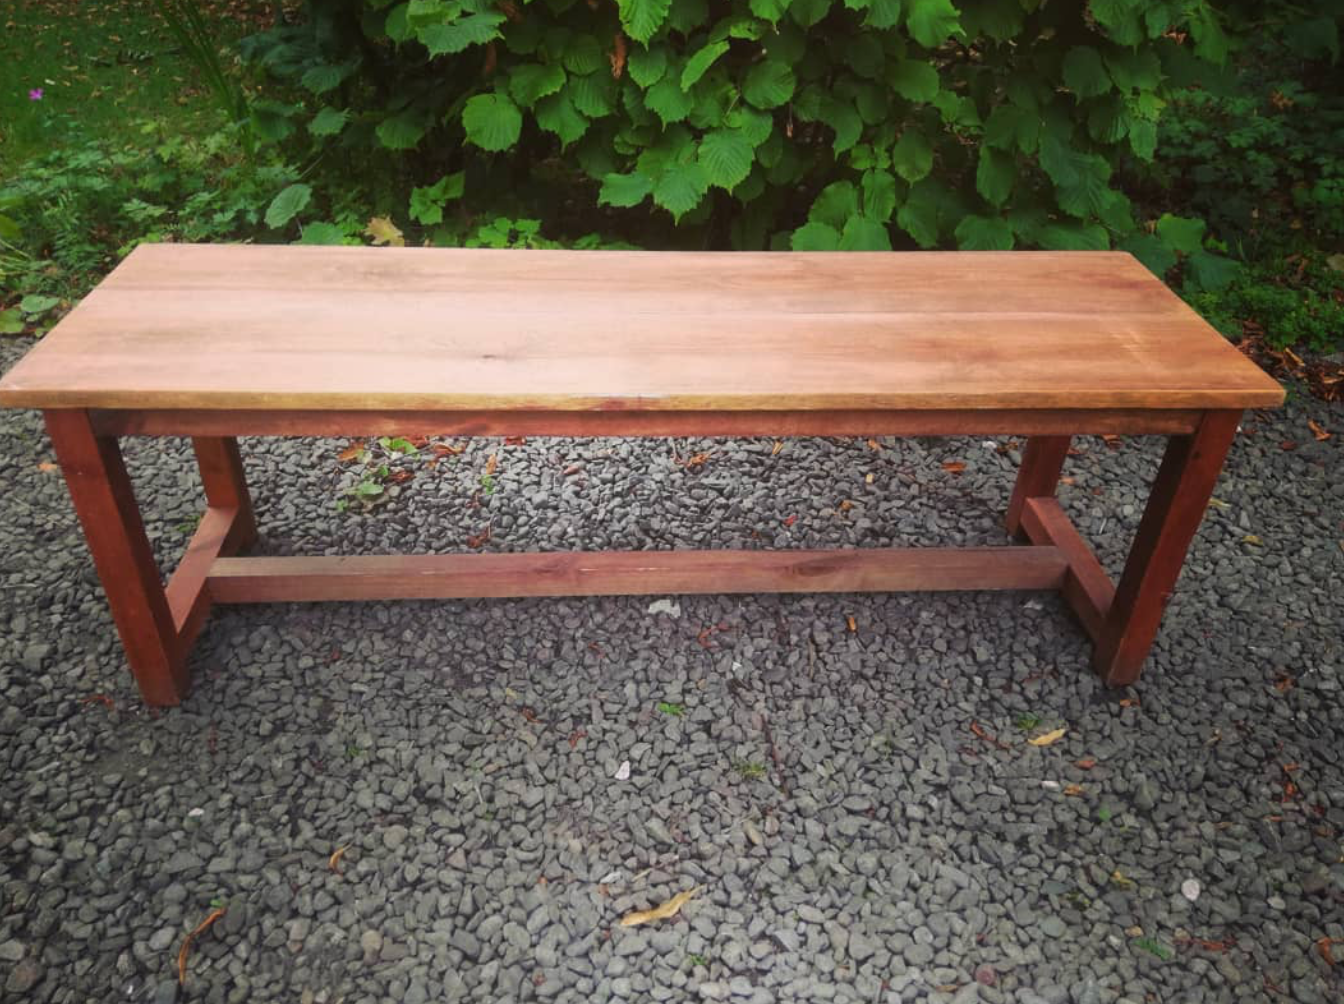 Vintage wooden rustic benches - 2 available for painting